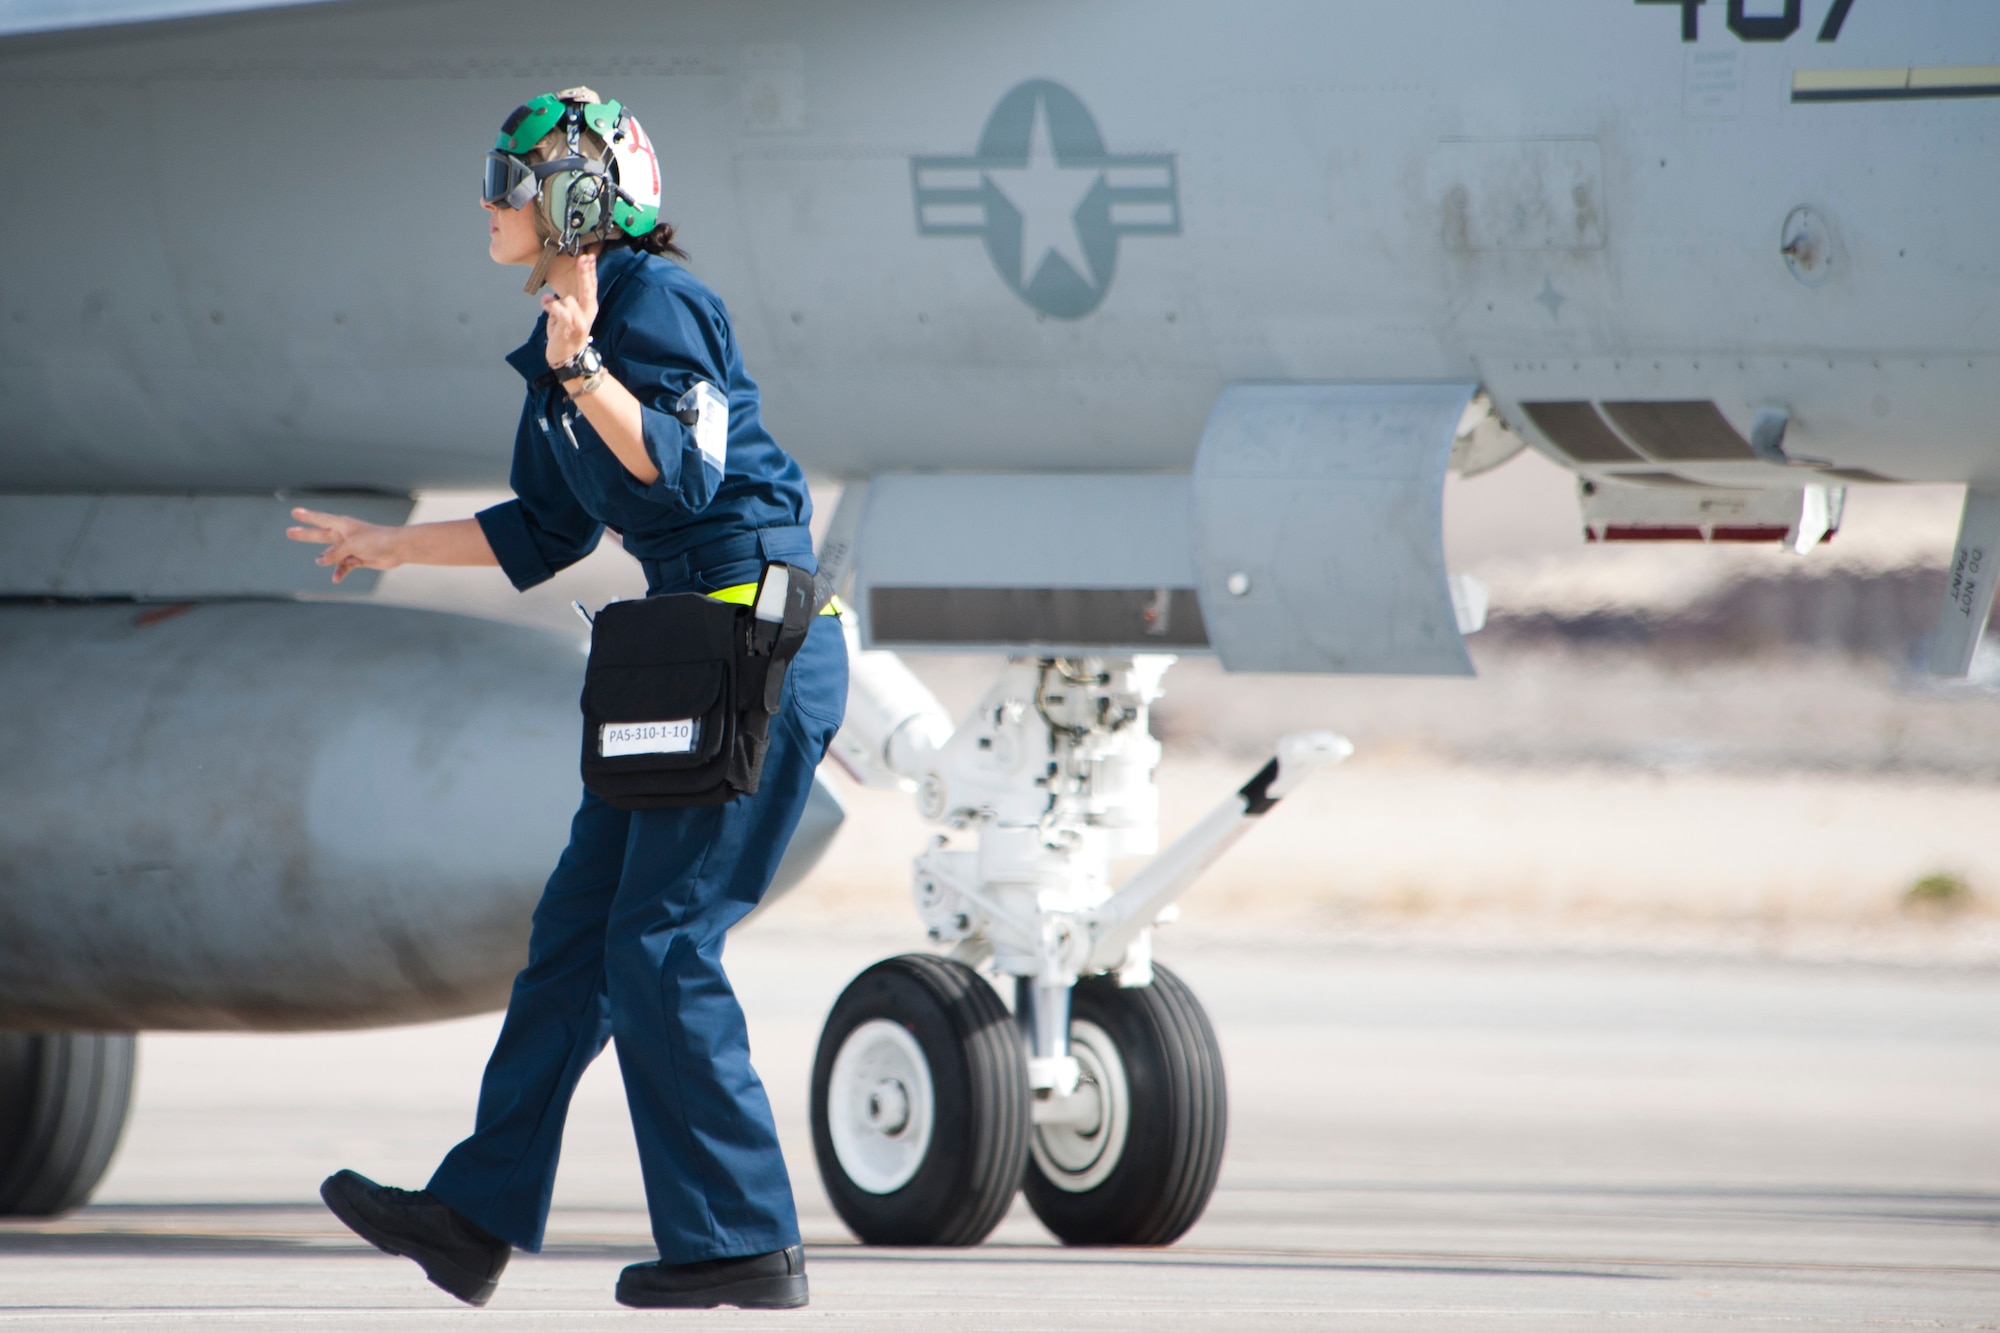 U.S. Navy Petty Officer 3rd Class Colleen Shine, Strike Fighter Squadron 25 (VFA-25), Naval Air Station, Lemoore, Calif., plane captain, signals to an F/A-18E Hornet pilot to power up the aircraft engines prior to taxiing onto the Nellis Air Force Base, Nev. flight line Jan. 25, 2013. The VFA-25 participation in Red Flag 13-2 trains ground workers and aircrews on joint and allied air forces on realistic threat tactics. (U.S. Air Force photo by Lawrence Crespo) 